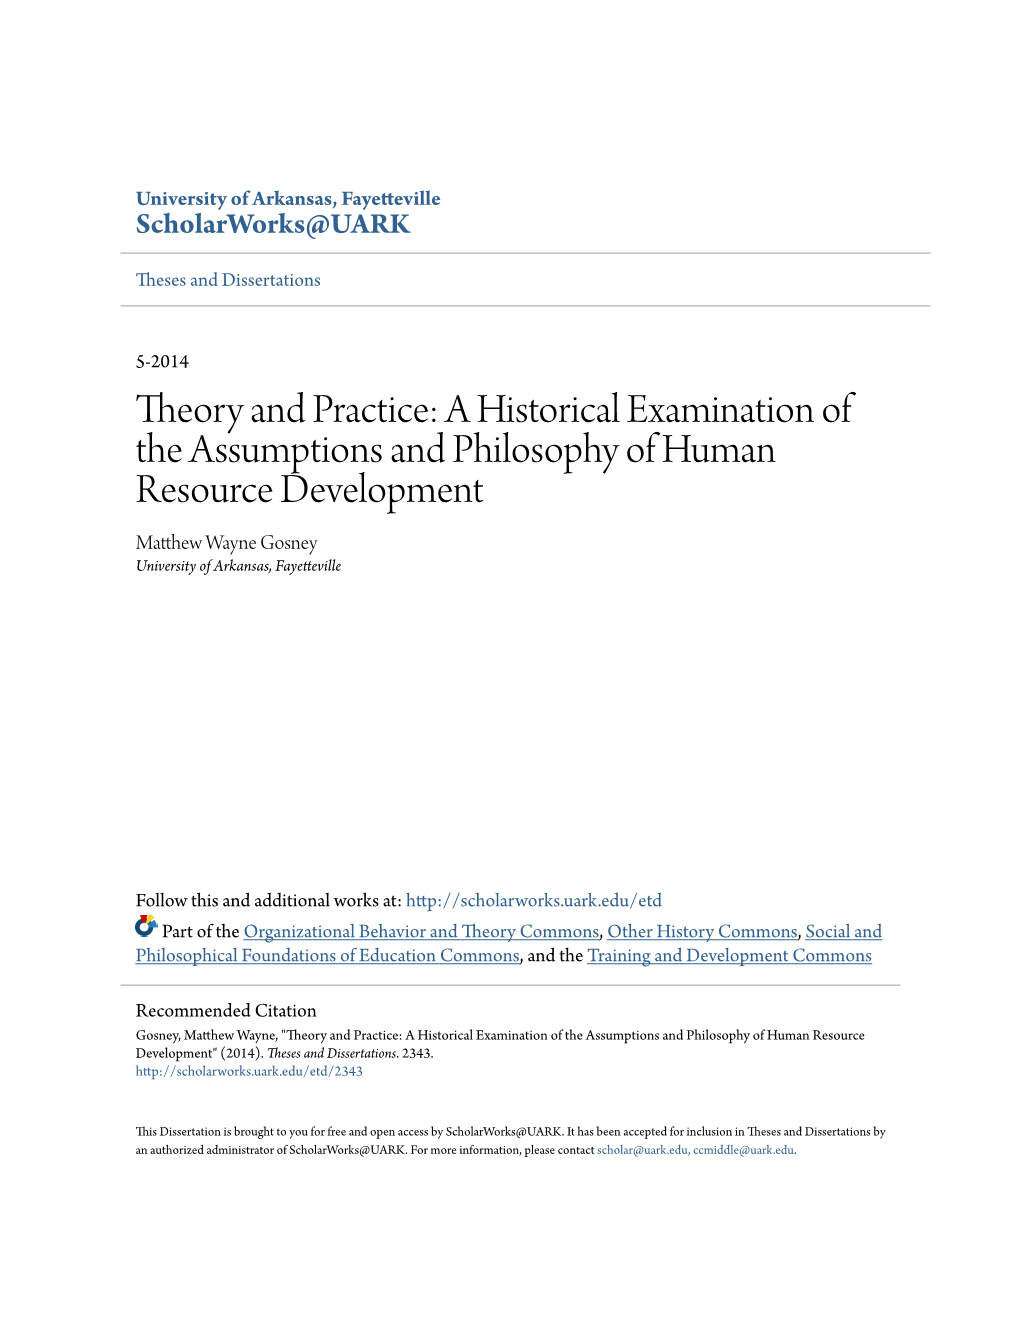 Theory and Practice: a Historical Examination of the Assumptions